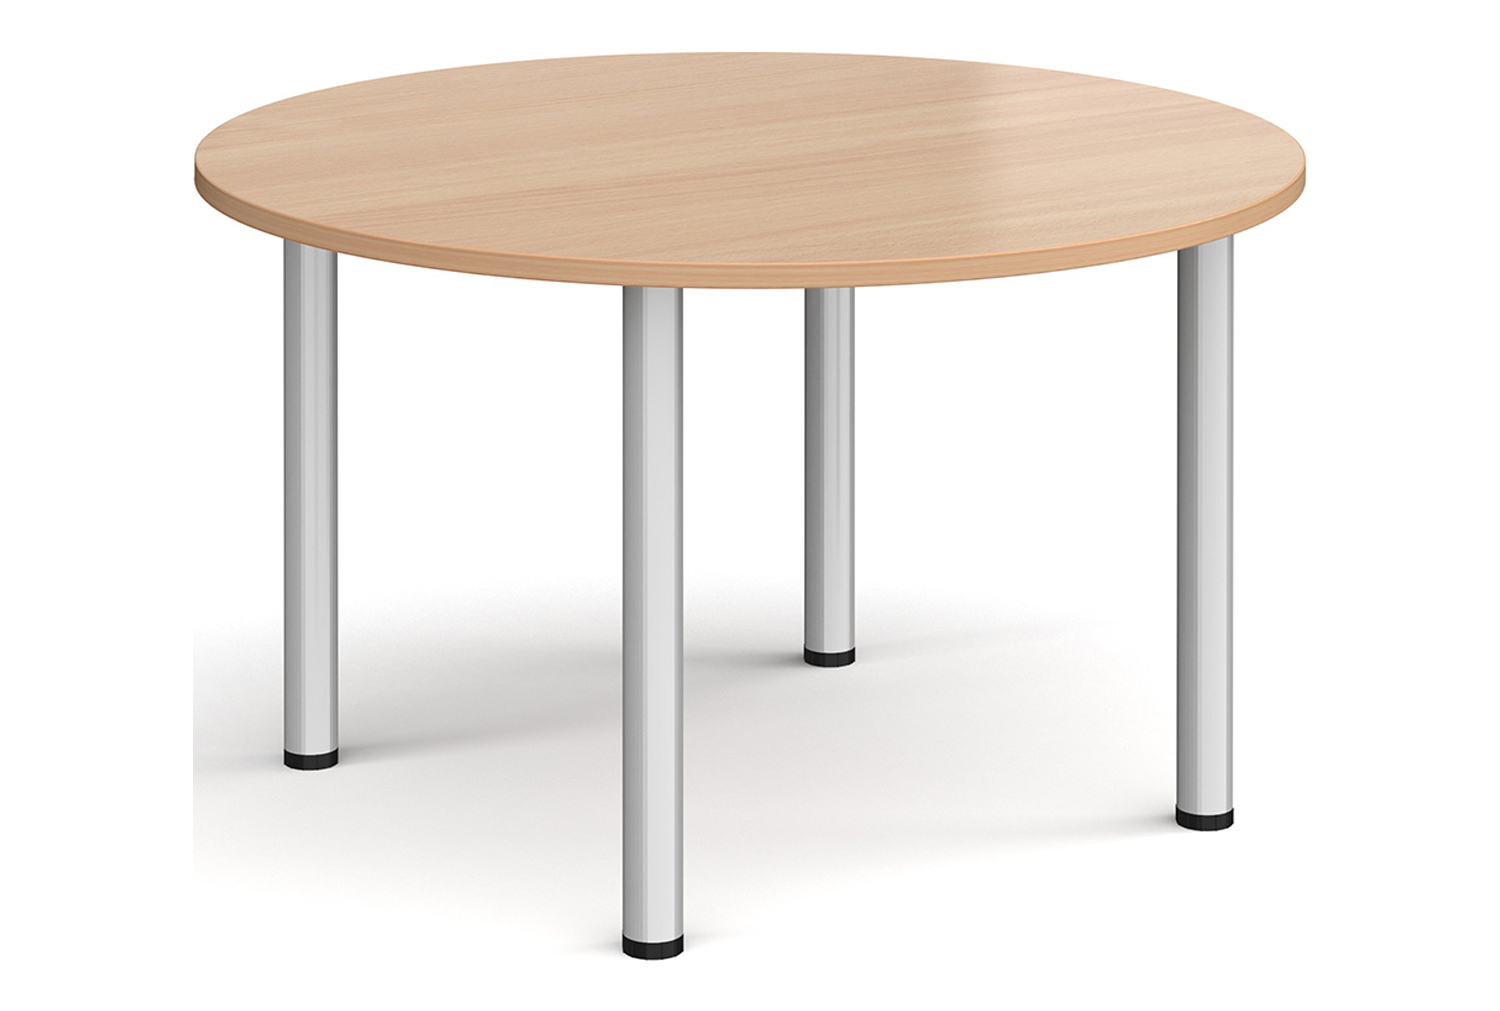 Bowers Round Meeting Table, 120diax73h (cm), Beech